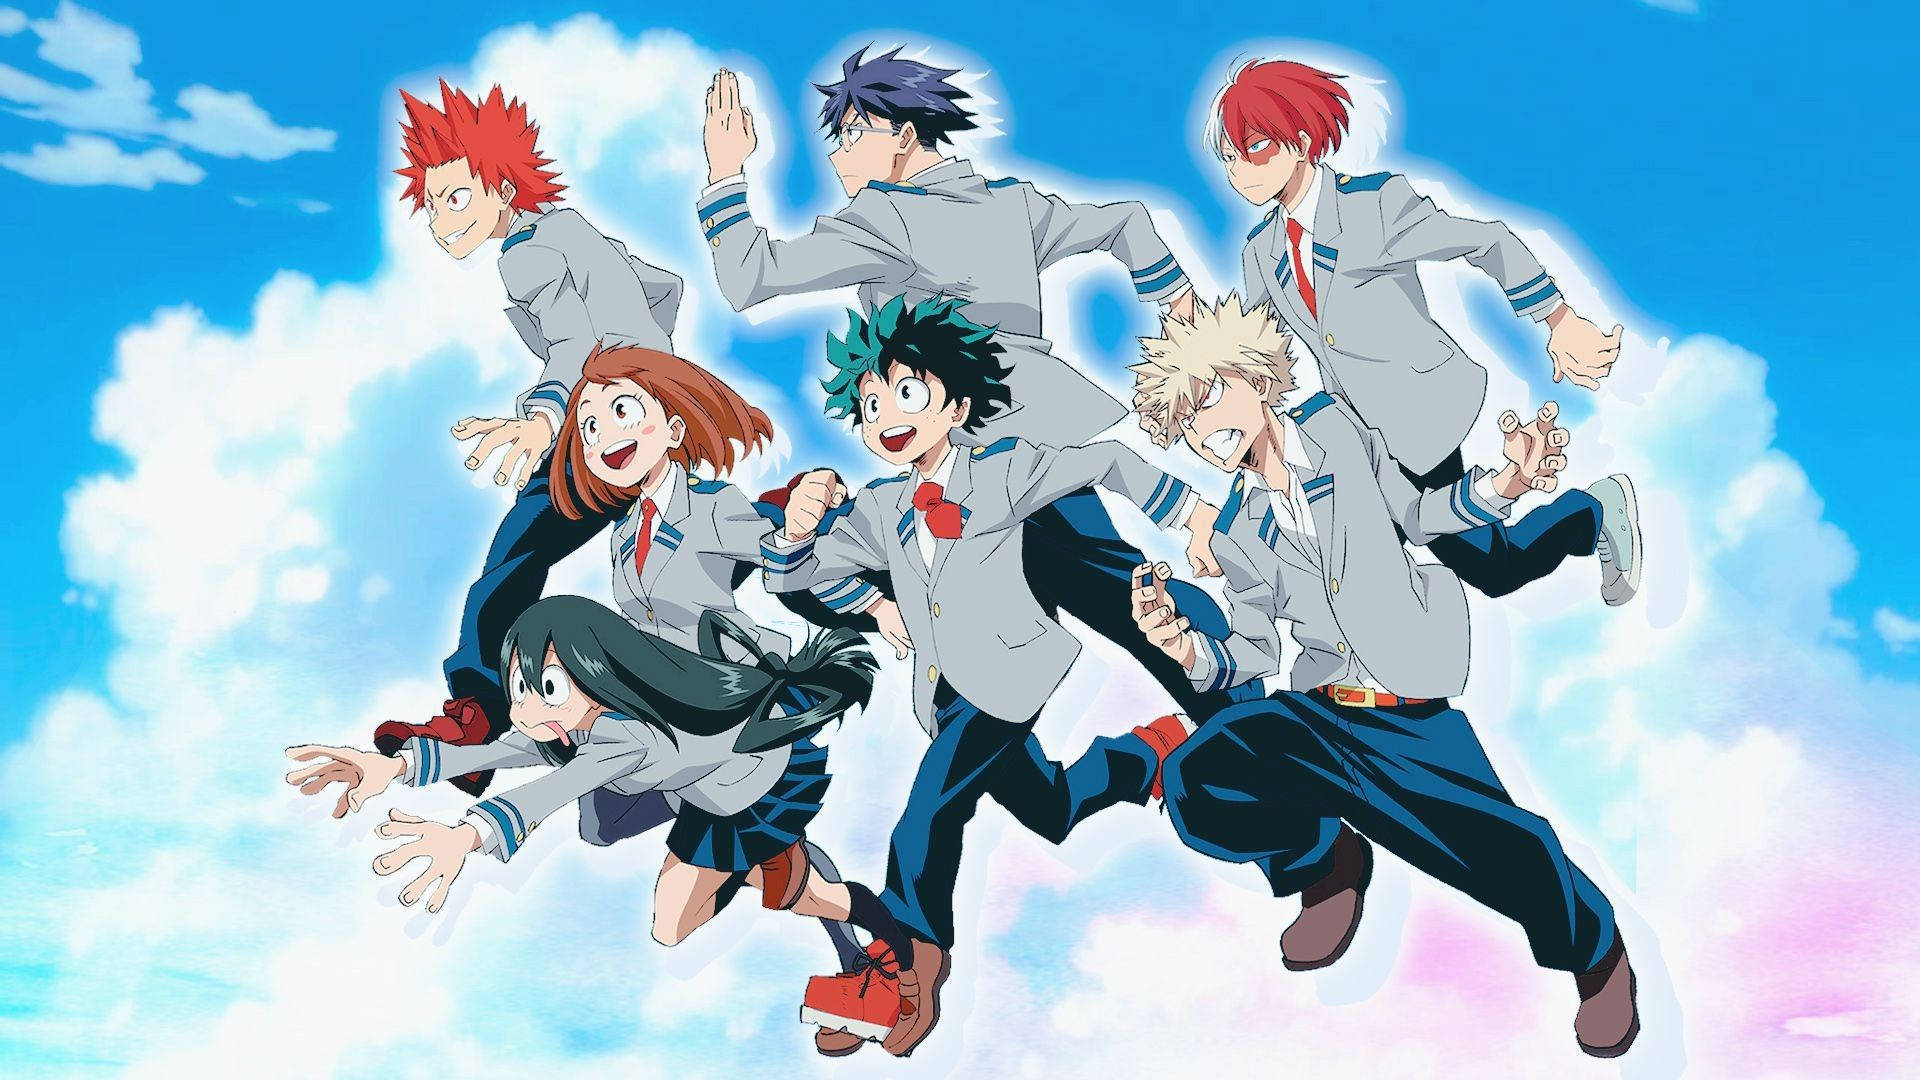 Mha Class 1-a Students Background